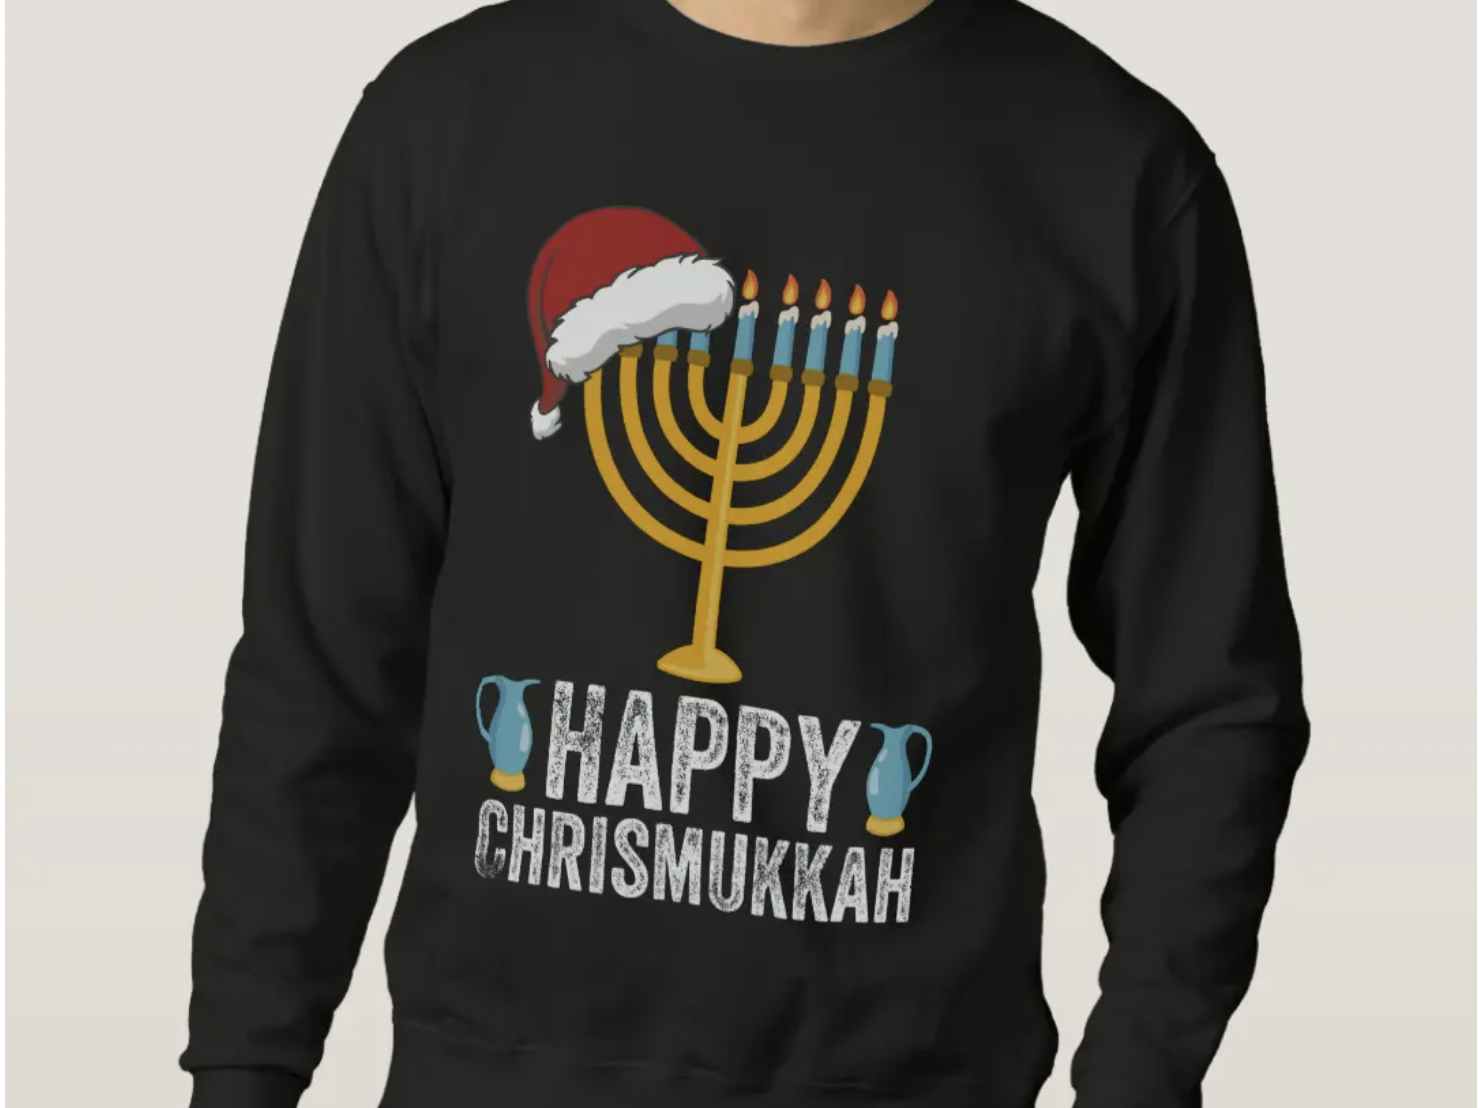 Sweater that says, "Happy Chrismukkah